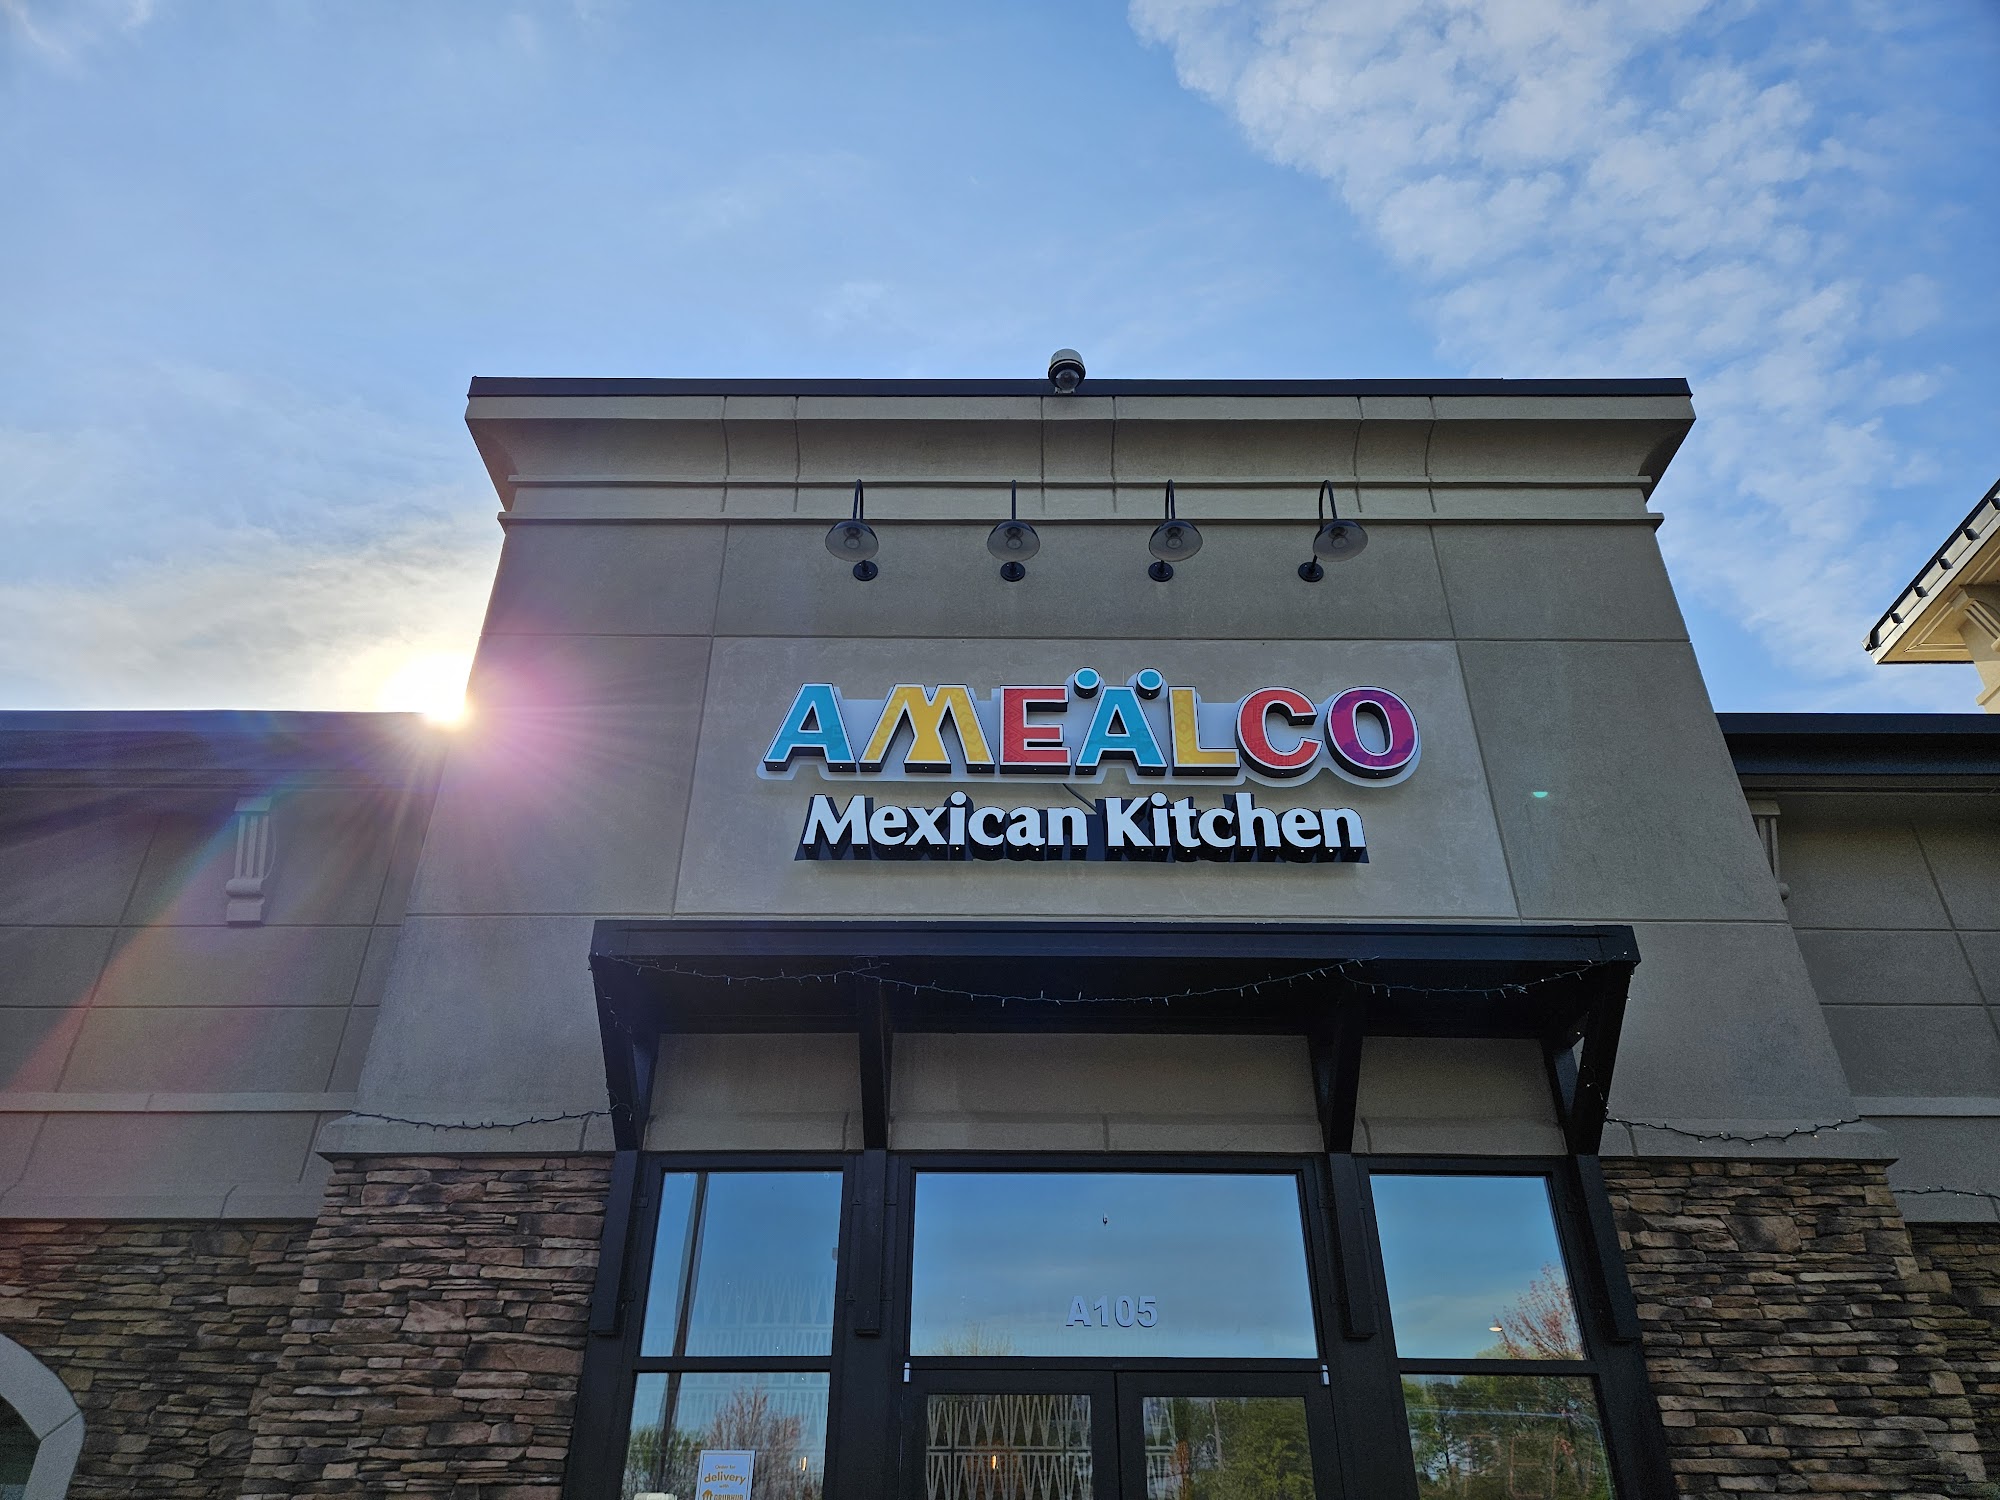 Amealco Mexican Kitchen